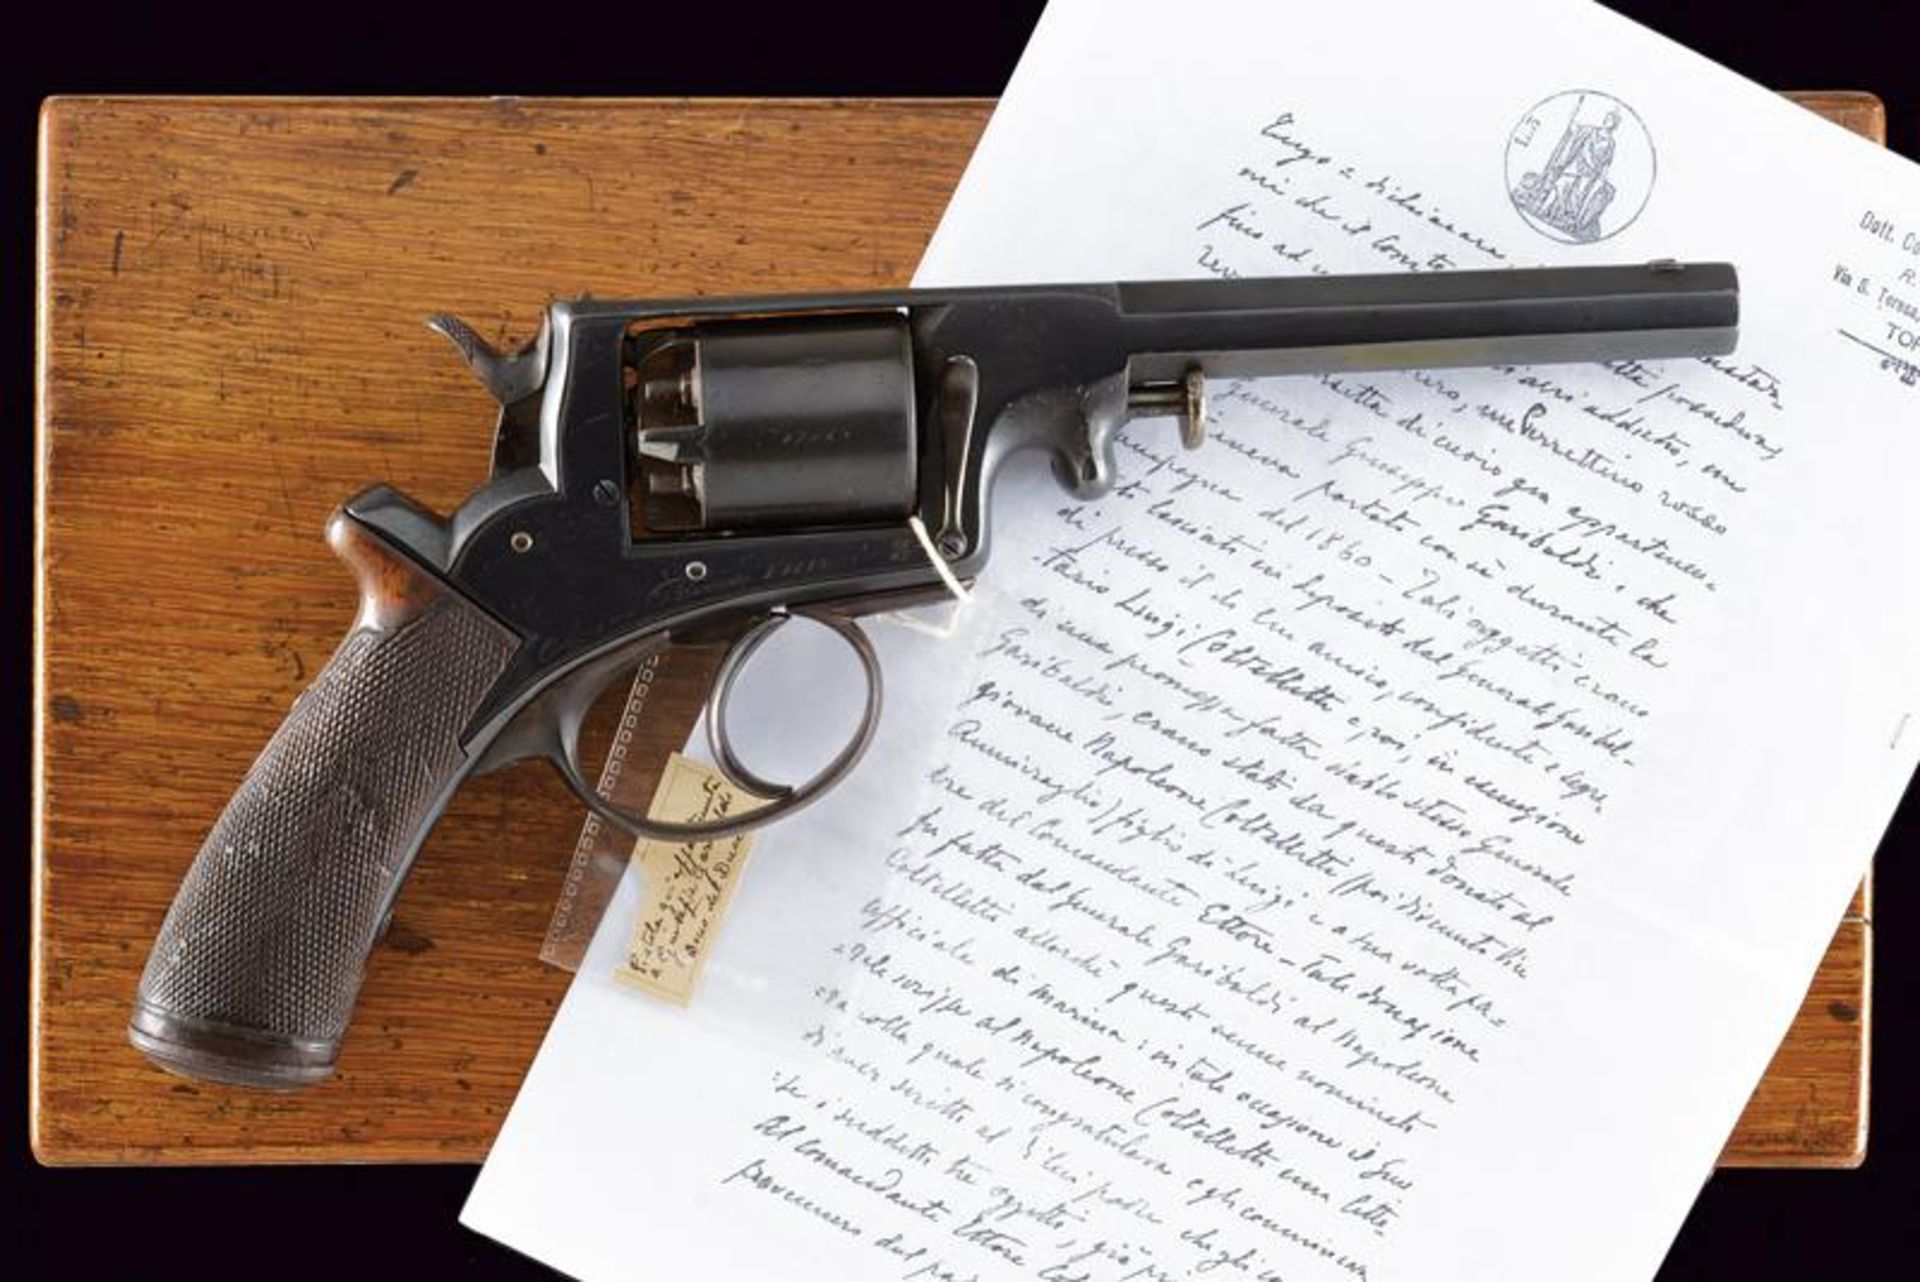 A cased Adams revolver by Francotte